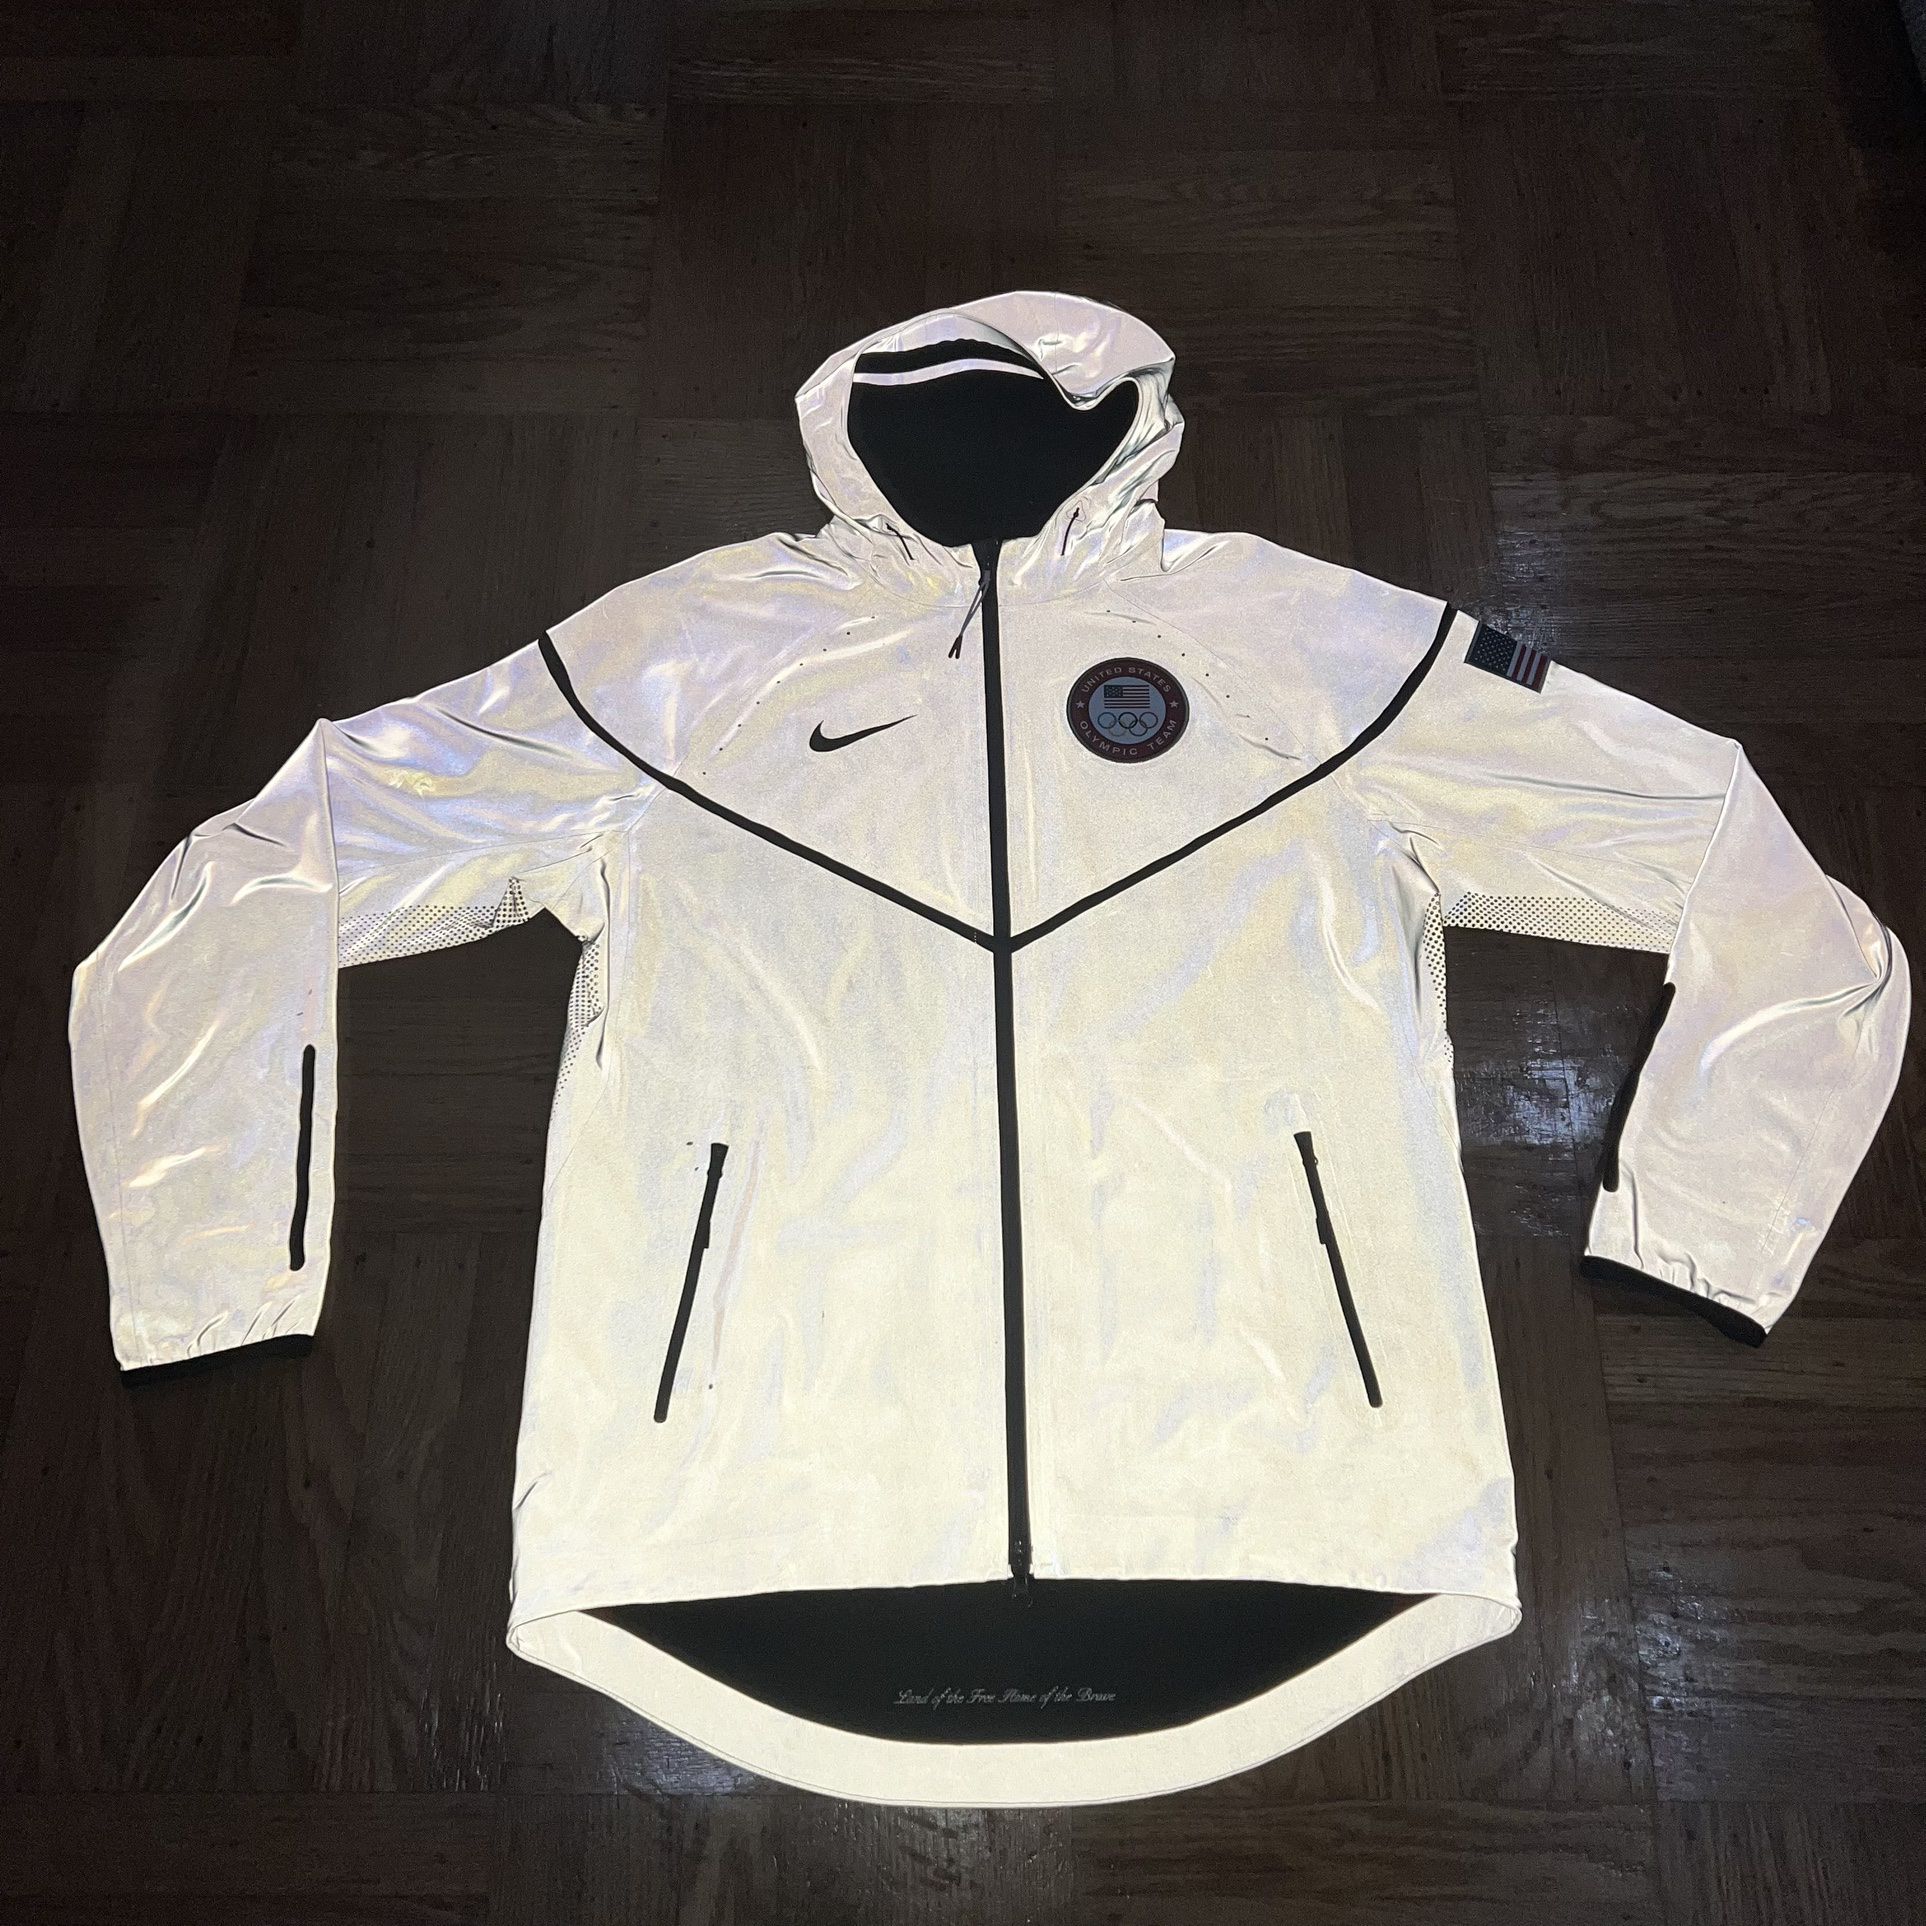 2012 US Olympic Basketball Gold Medal Nike 3m Jacket Size Large for Sale in Daly City, - OfferUp